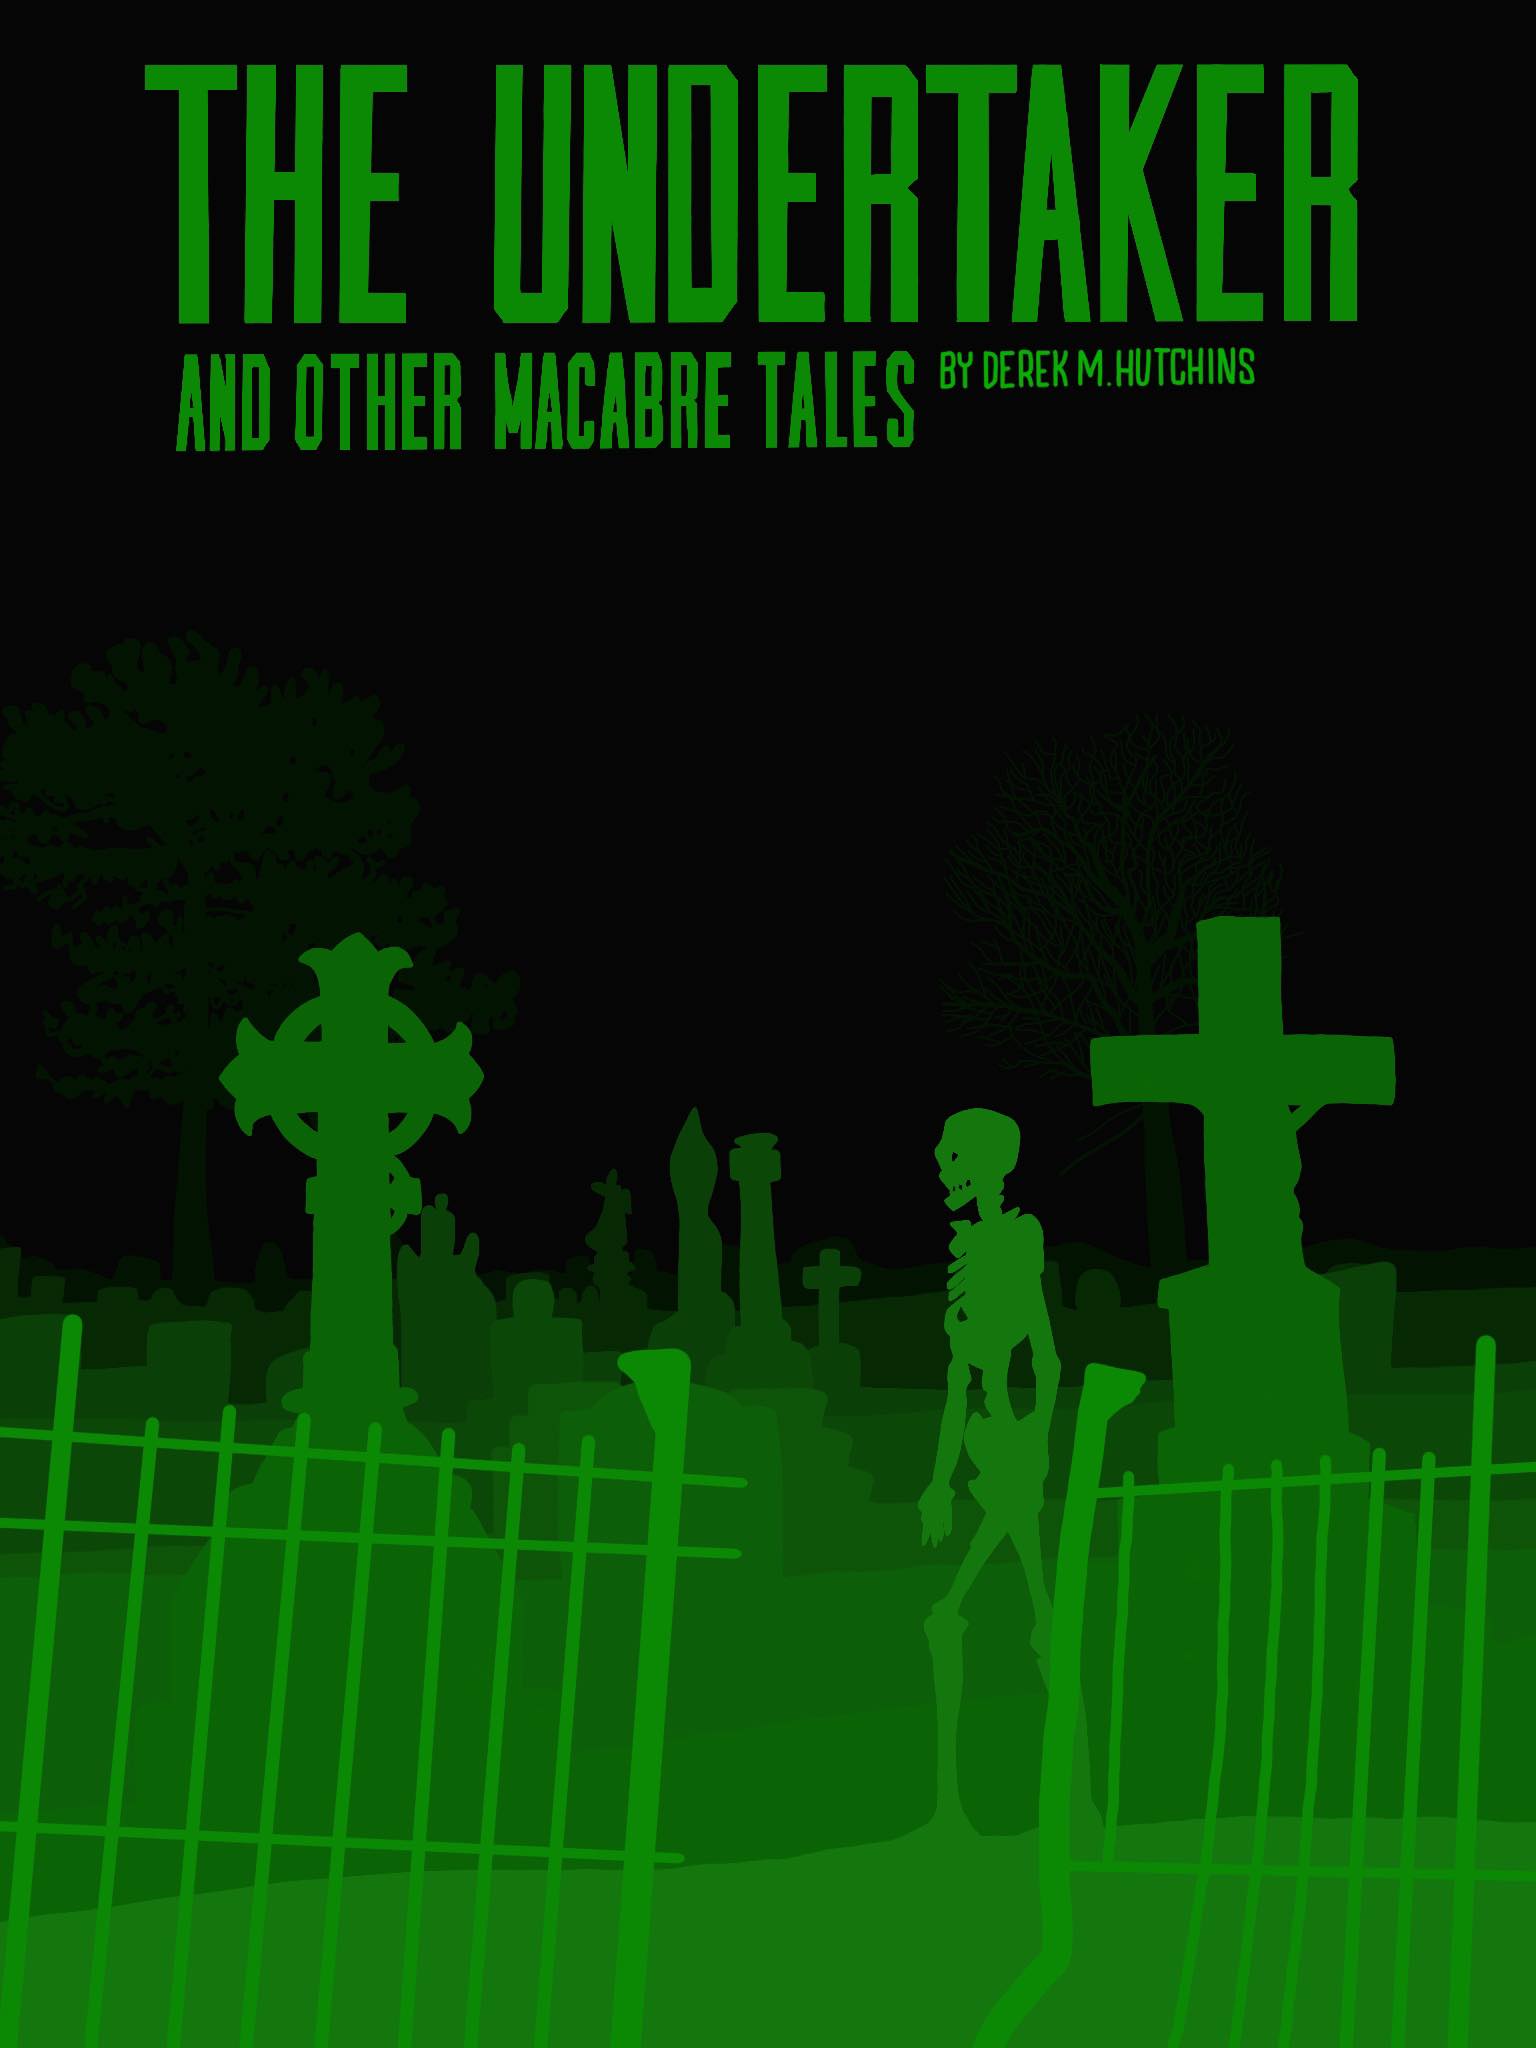 FREE: The Undertaker and Other Macabre Tales by Derek Hutchins